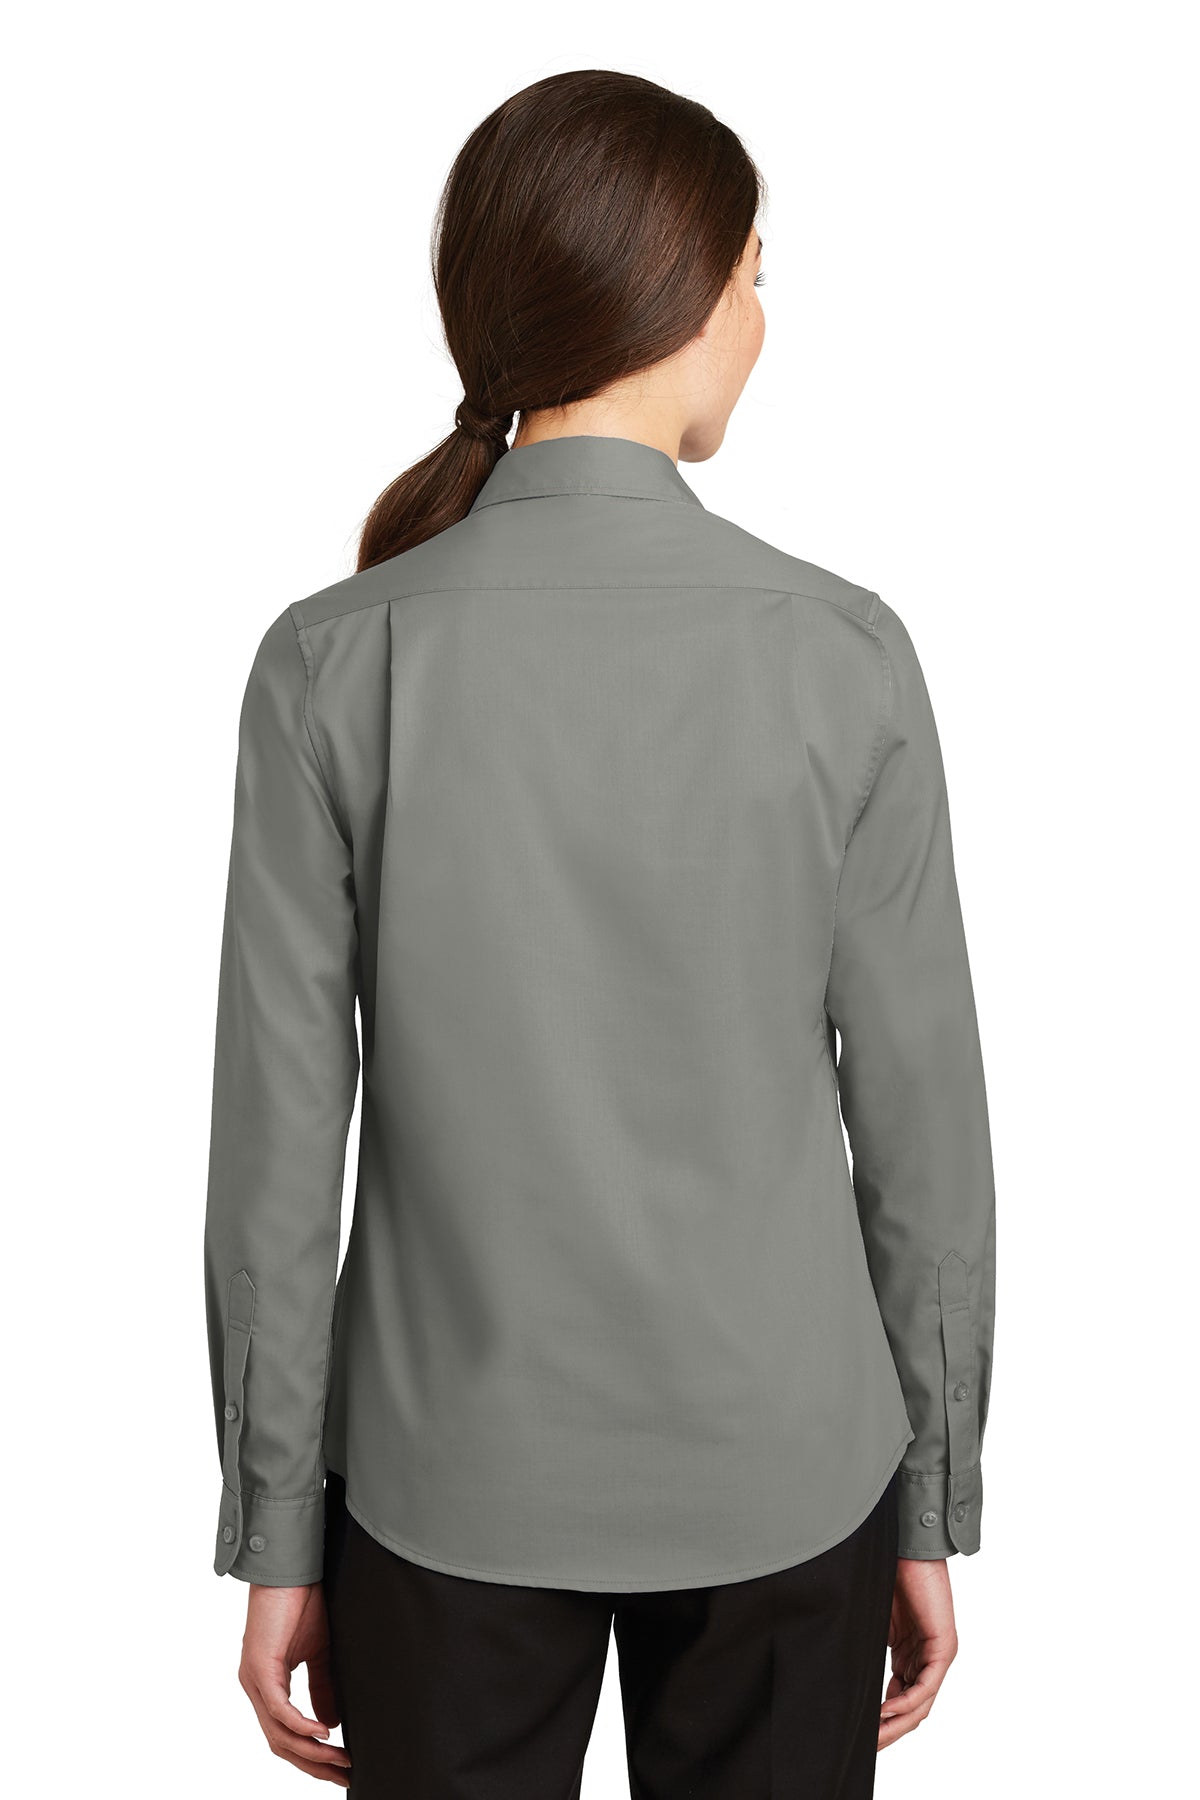 port authority_l663 _monument grey_company_logo_button downs